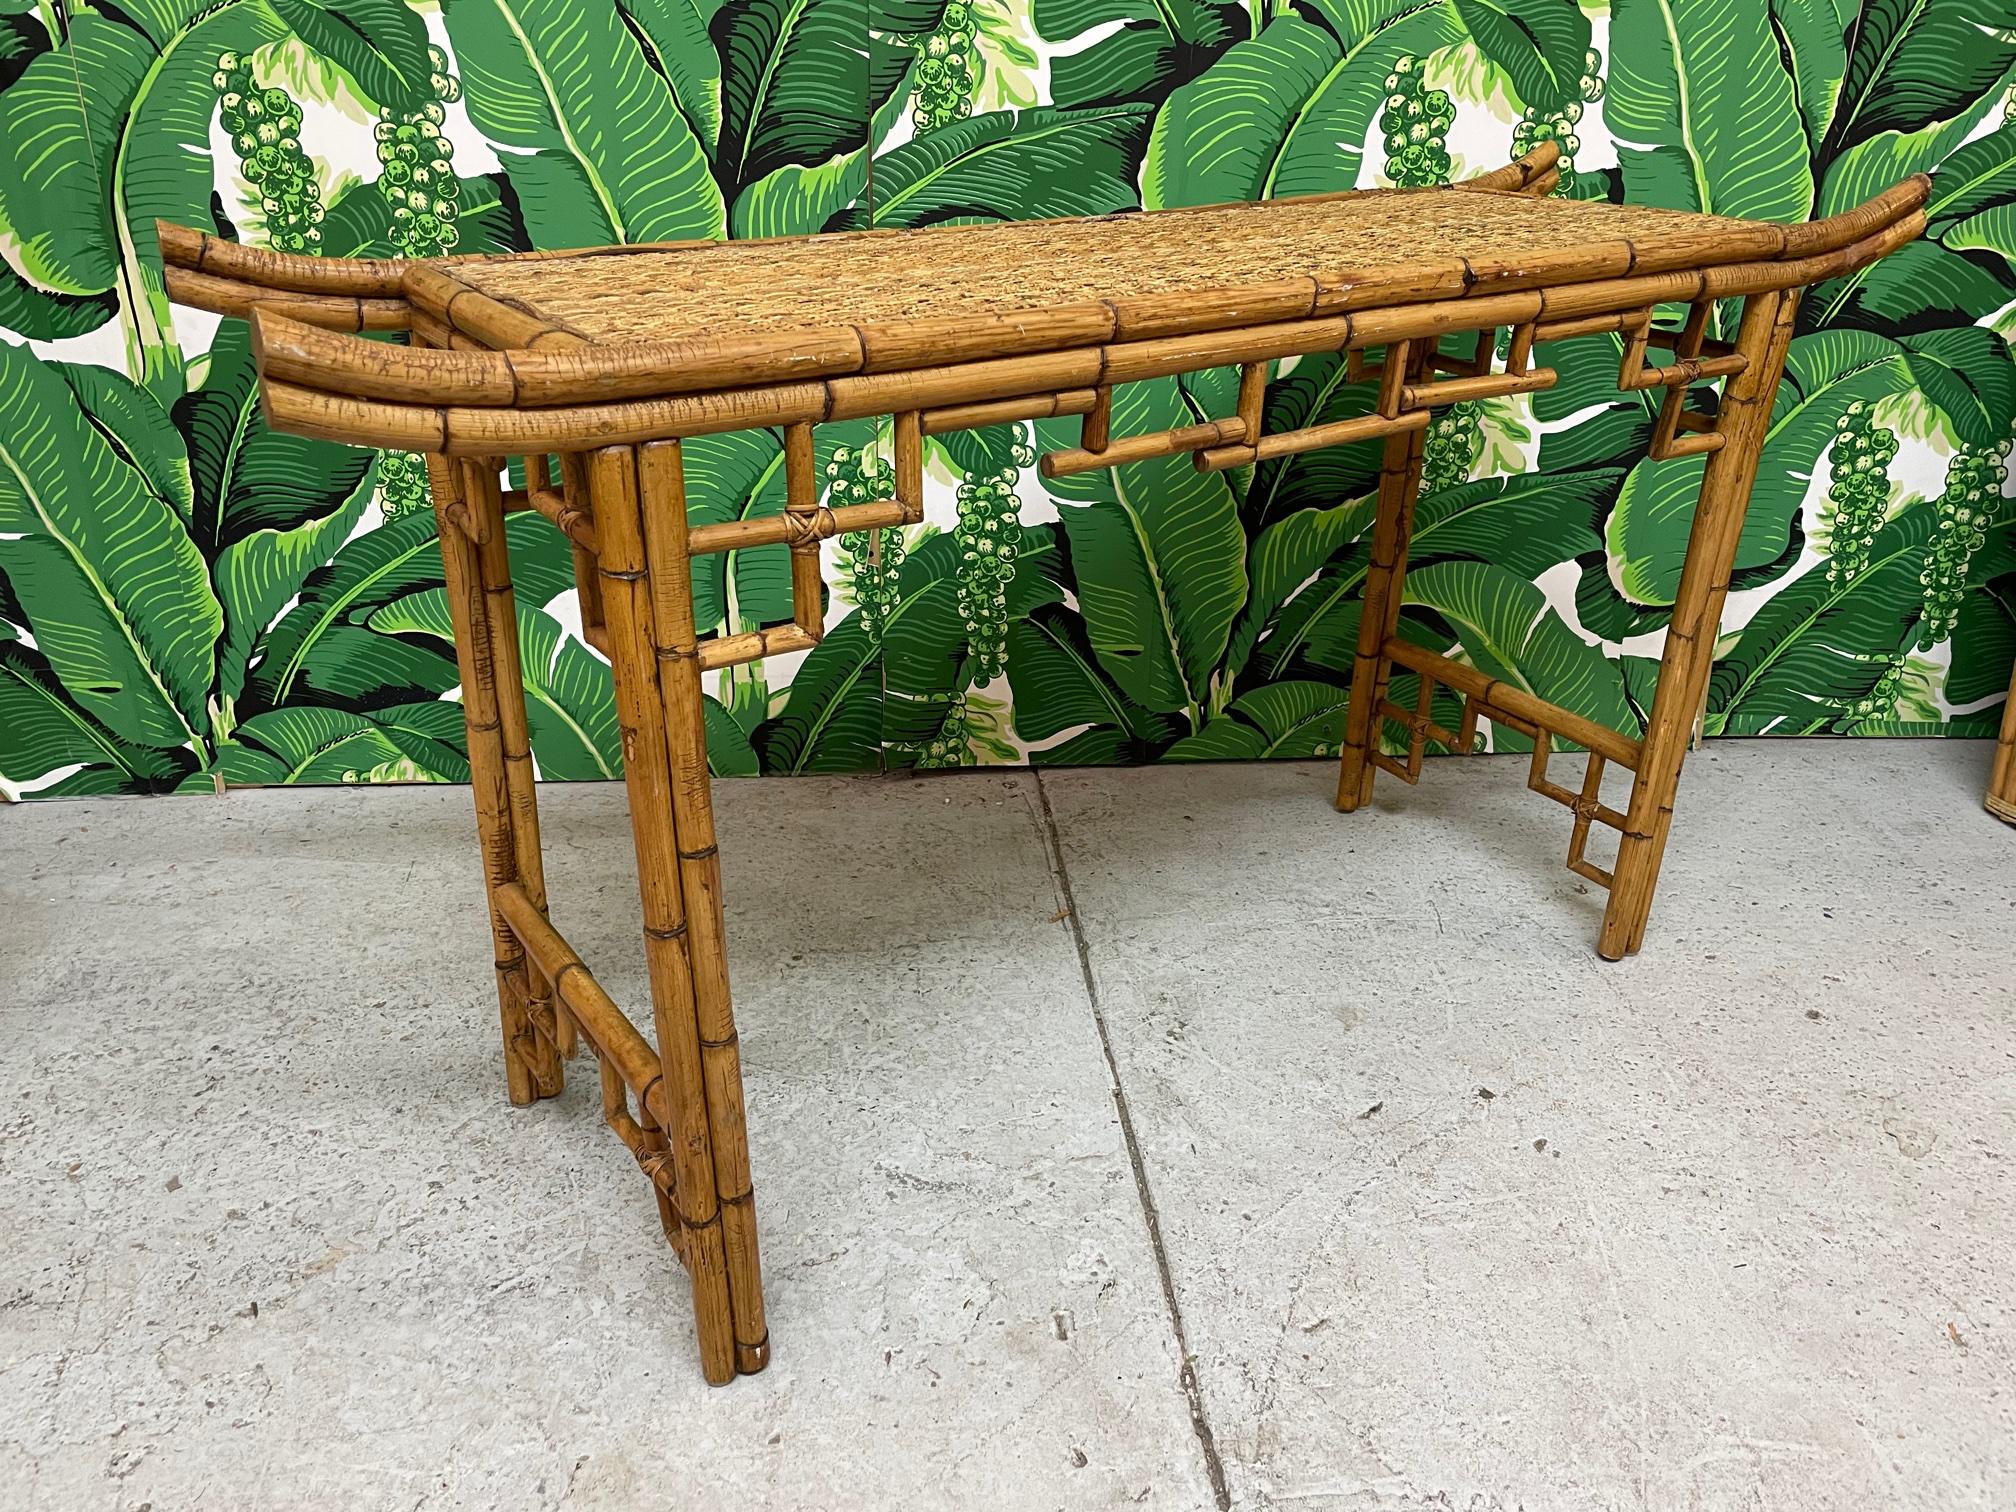 Vintage bamboo console or altar table features Asian chinoiserie styling with everted ends and decorative bamboo apron and spandrels. Top is veneered in woven wicker. Very good condition with only very minor imperfections consistent with age.

 